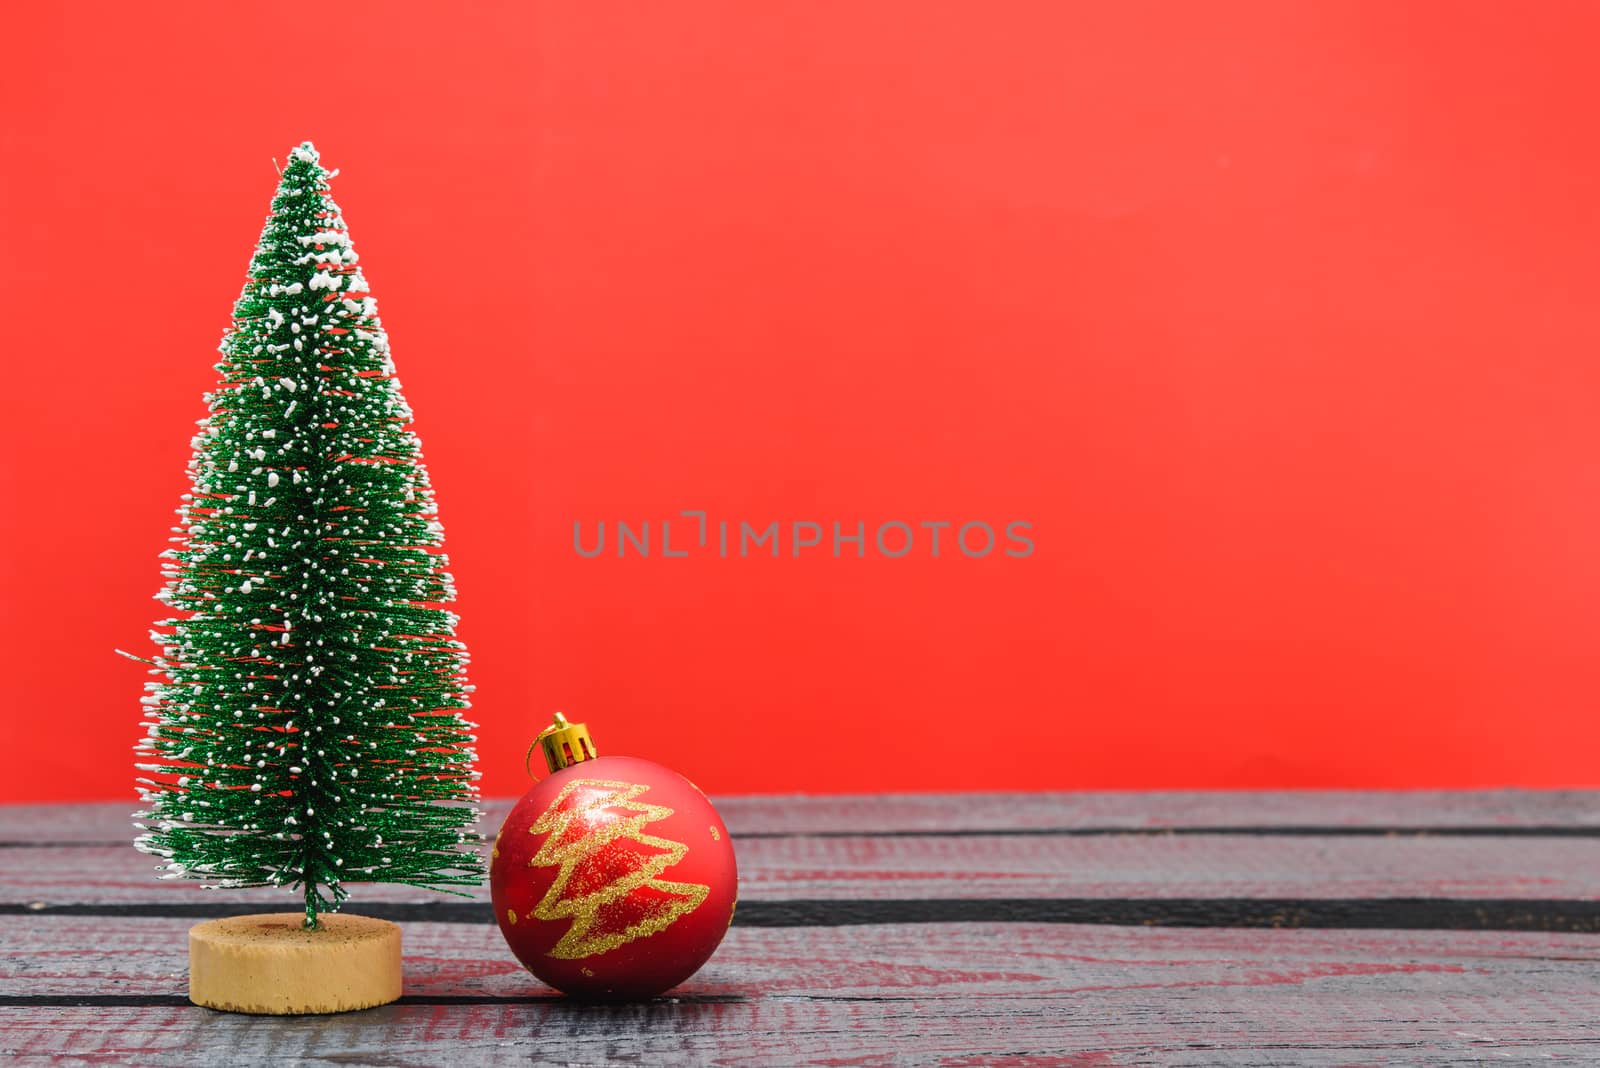 Christmas composition decorations, minimal green fir tree branches with snow and ball on red background. Merry Christmas concept. Copy space for text